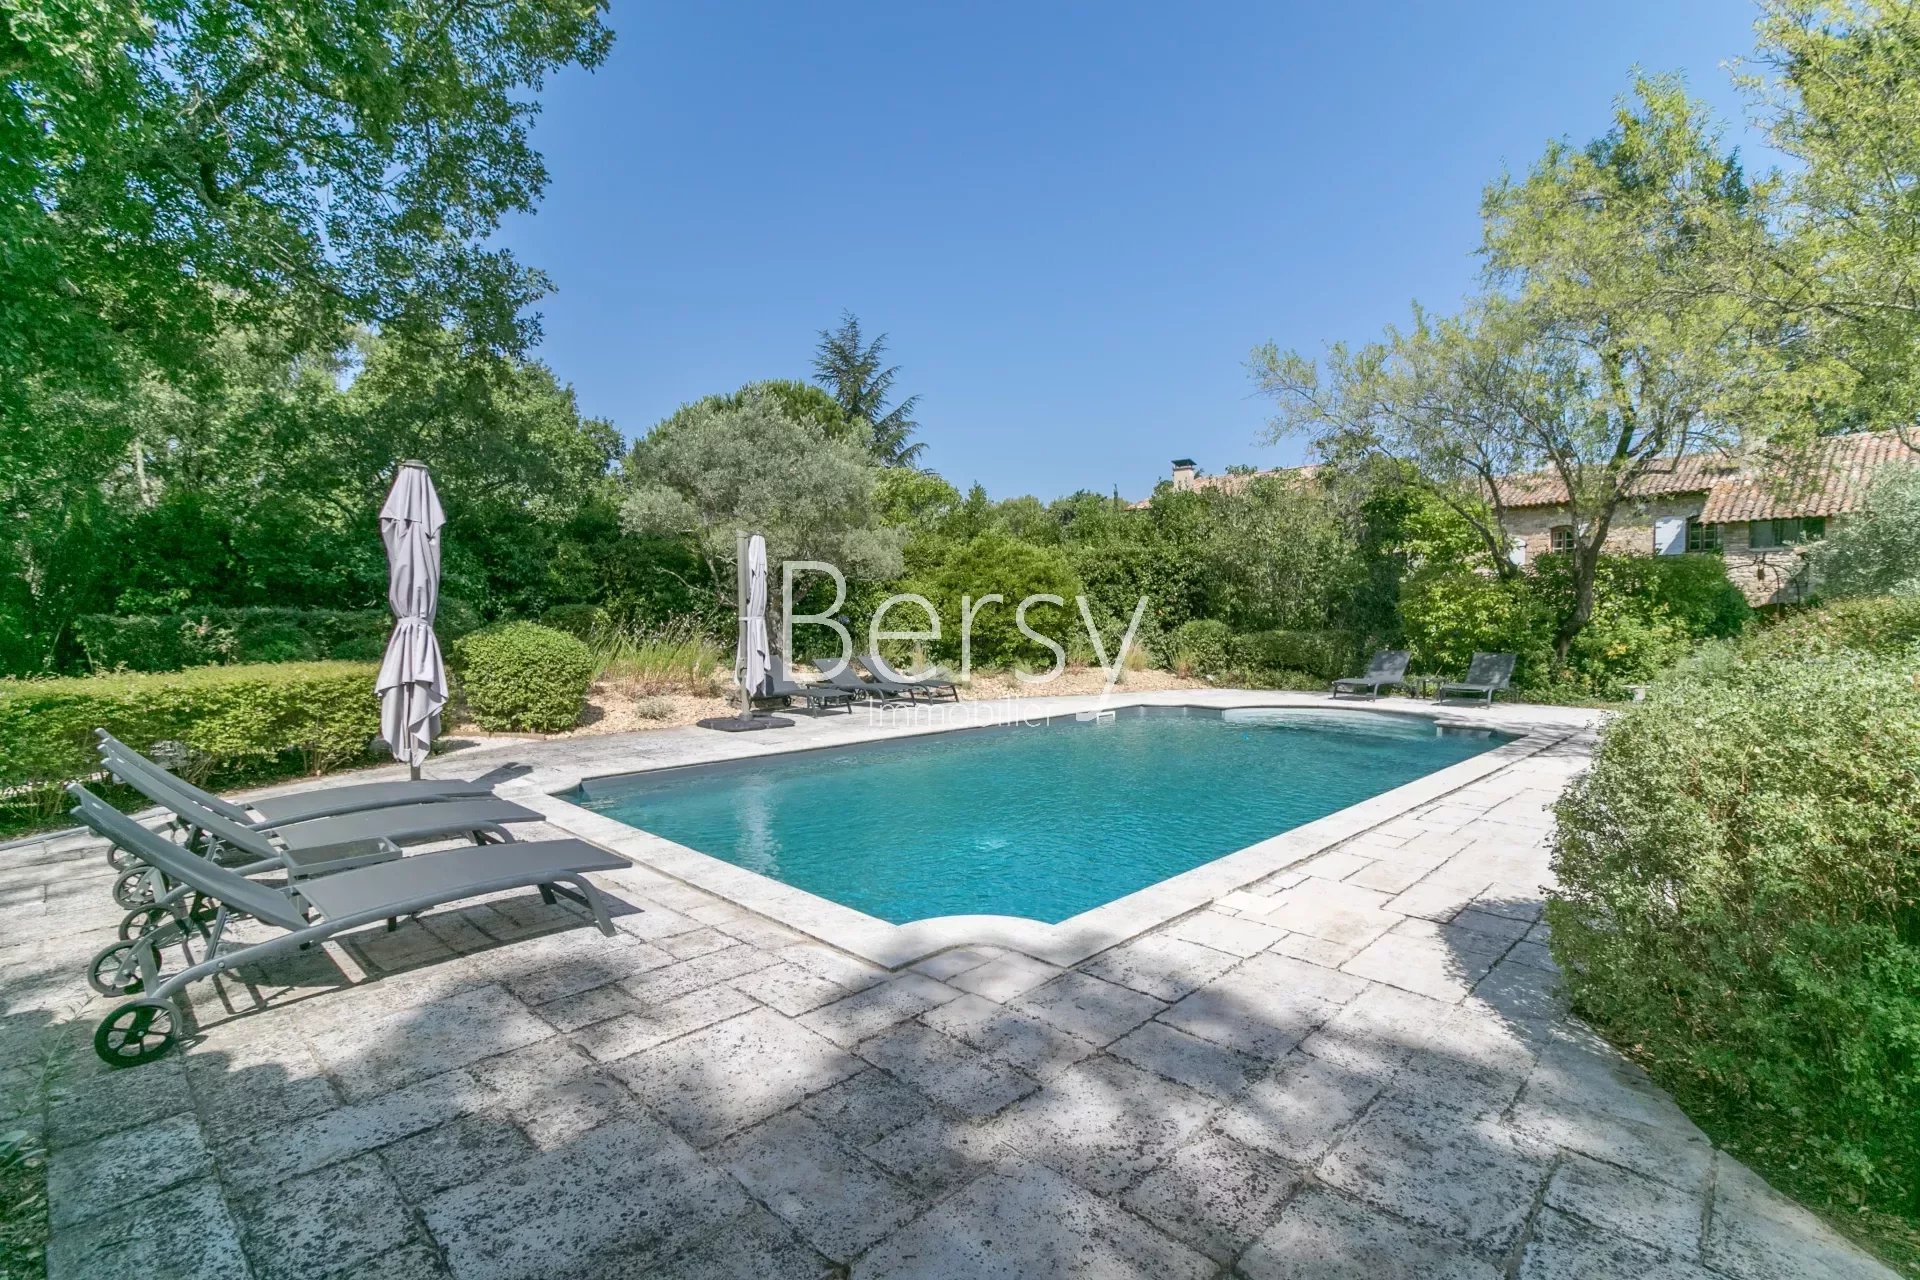 ★ Beautiful Authentic MAS of 1739 ★ BERSY LUXURY PROPERTIES® ★ HEADED POOL + independent Guest House ★